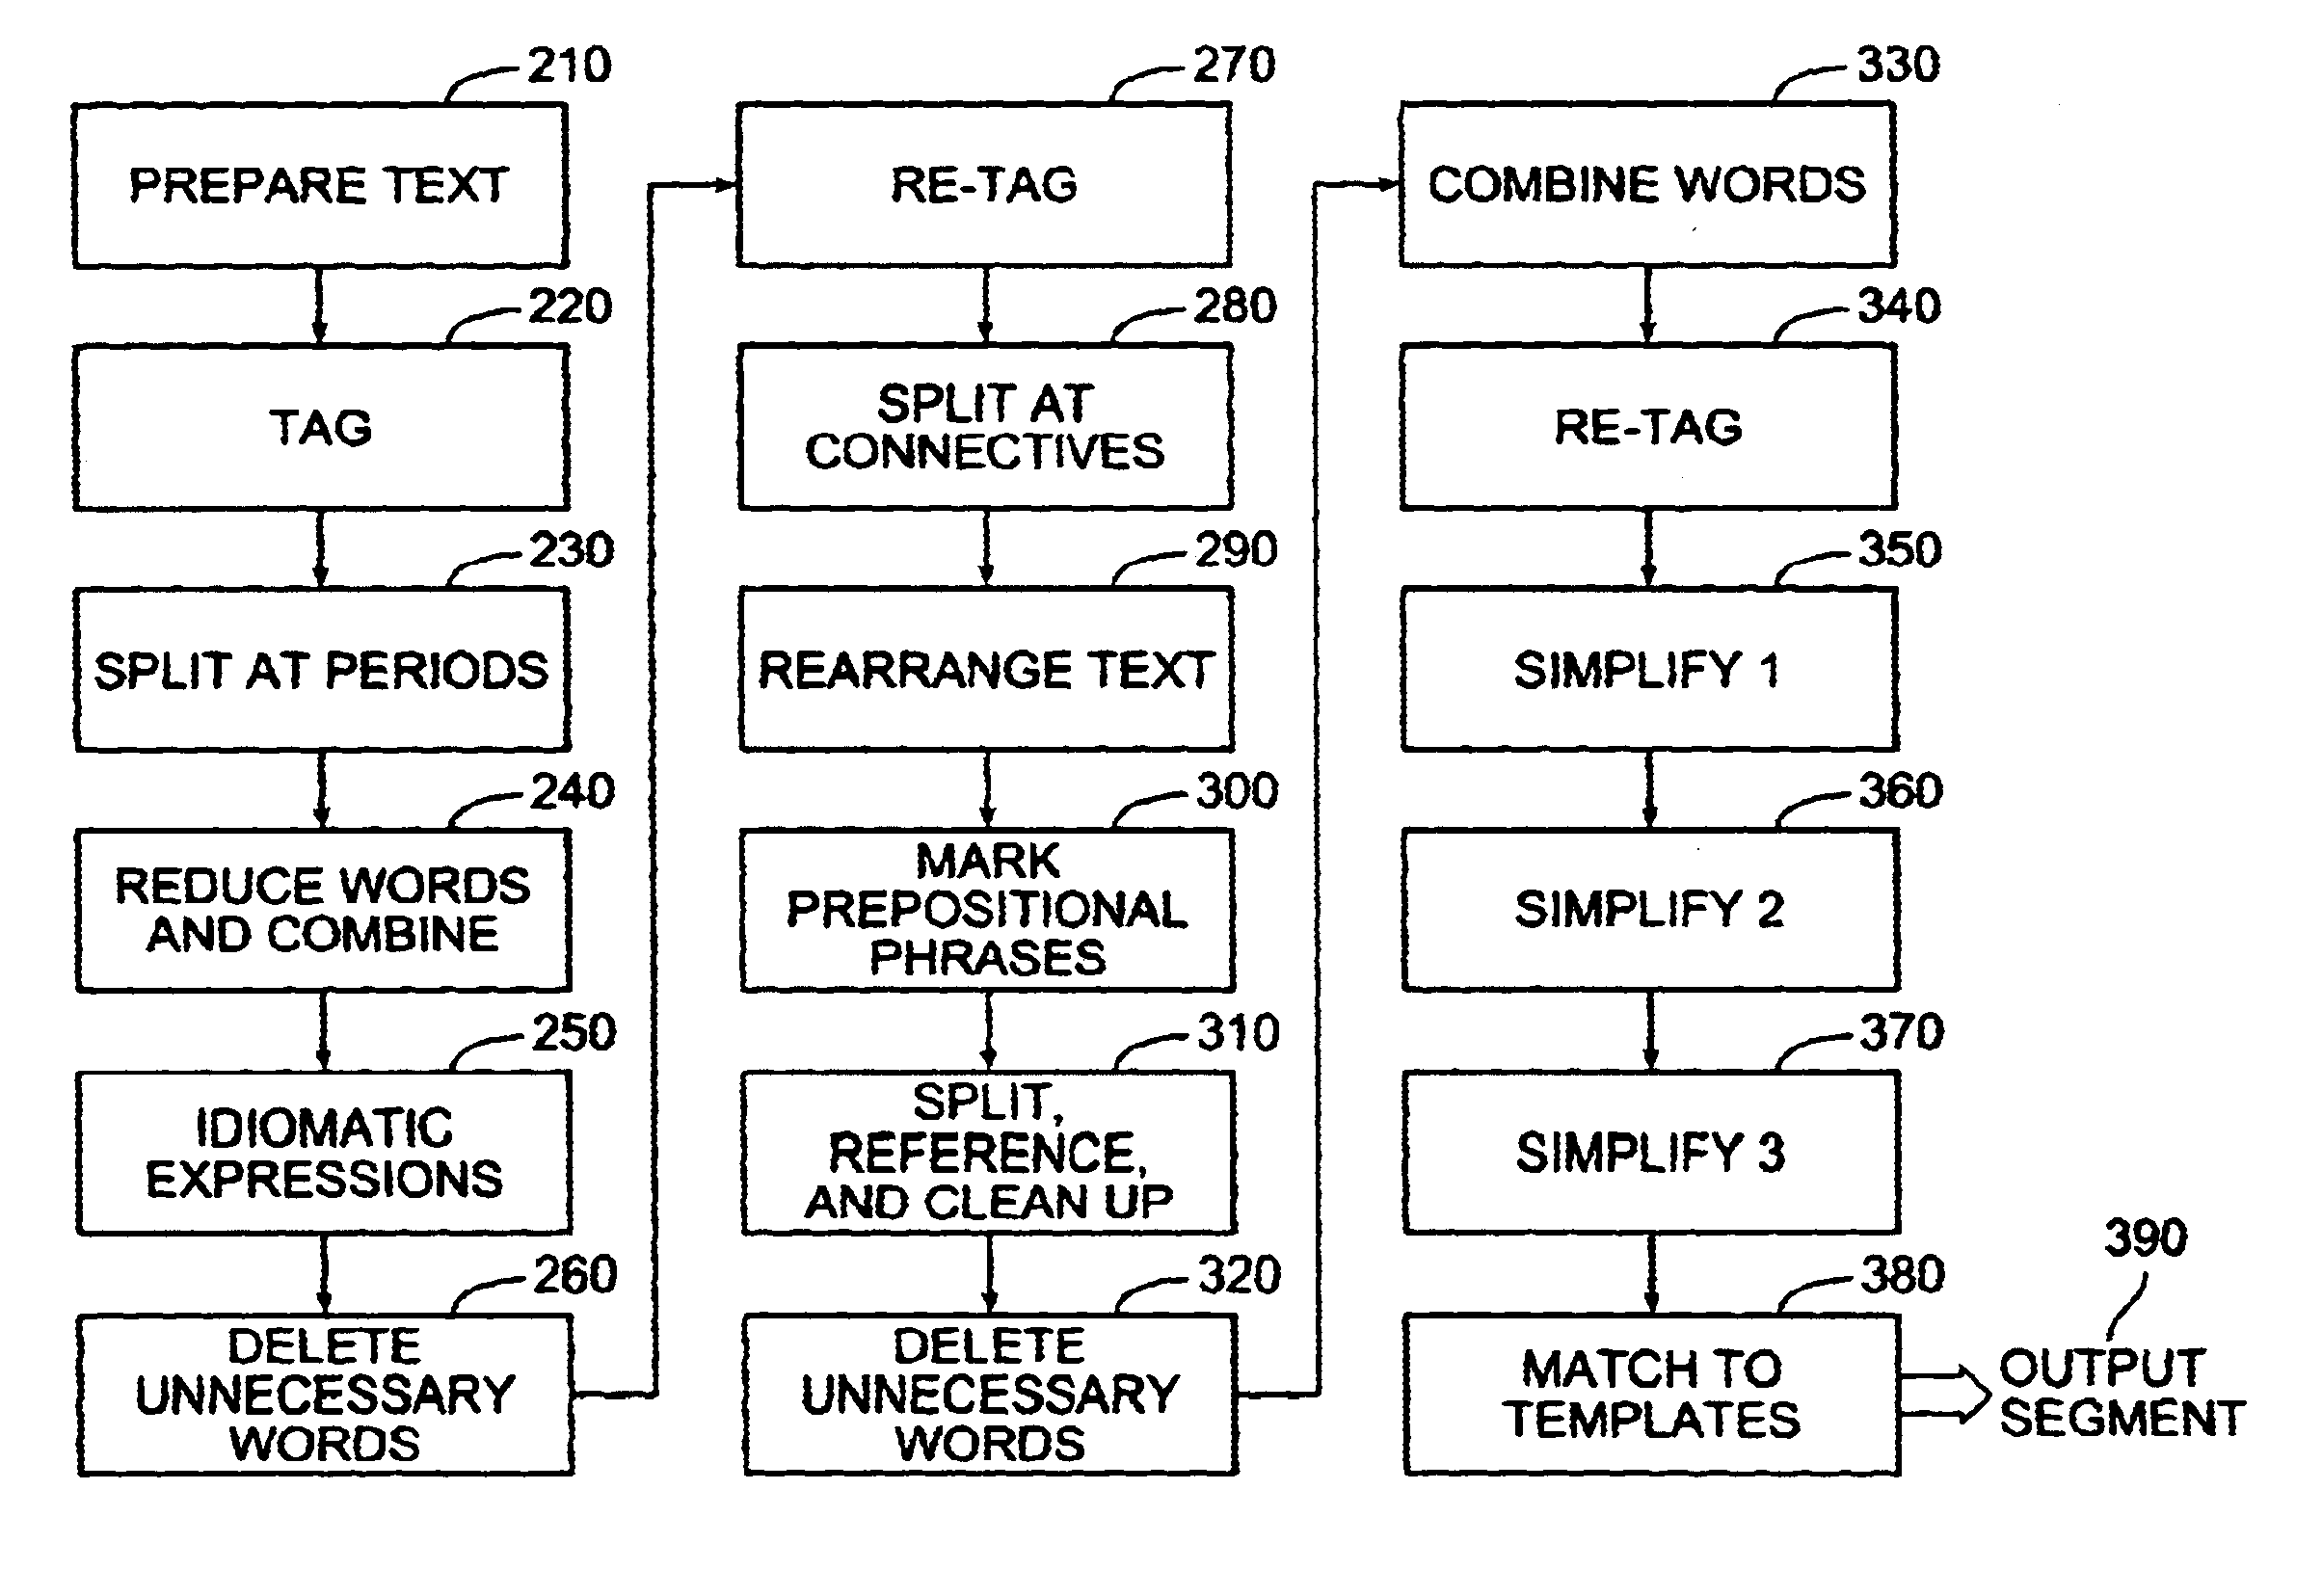 Method and system for text analysis based on the tagging, processing, and/or reformatting of the input text